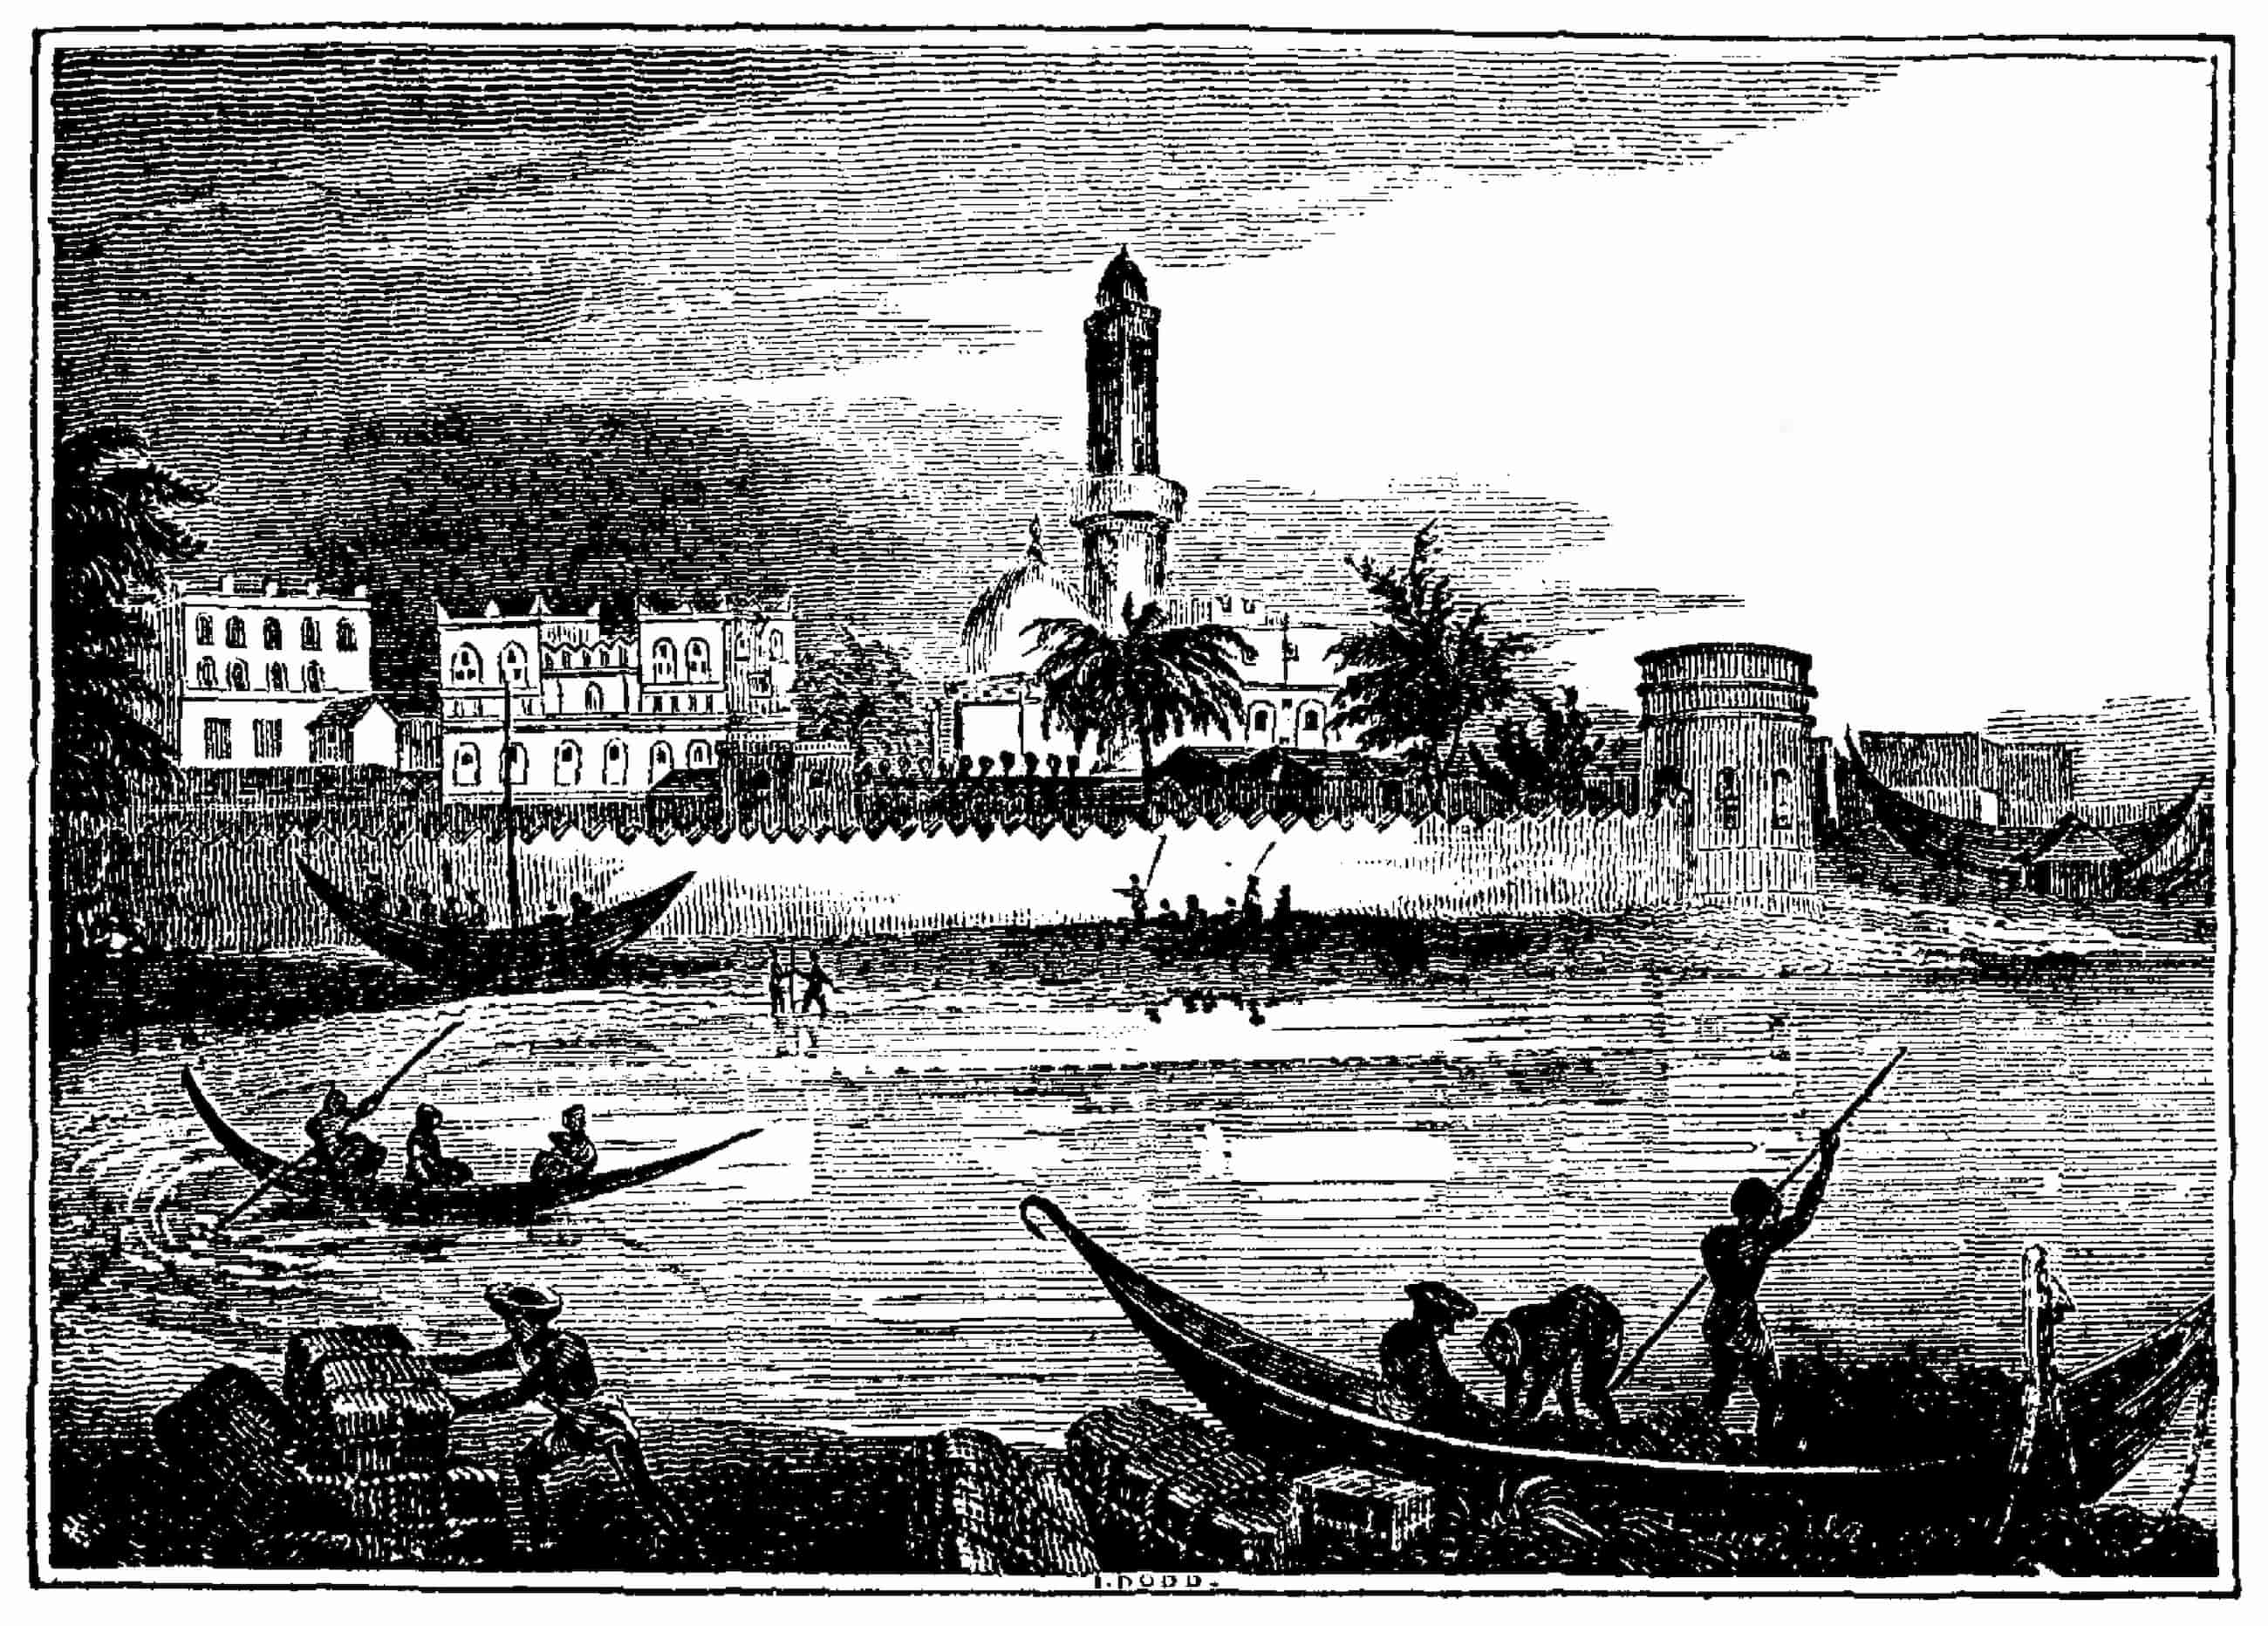 An illustration of the port of Mocha, small boats move in the water infront of a walled settlement.